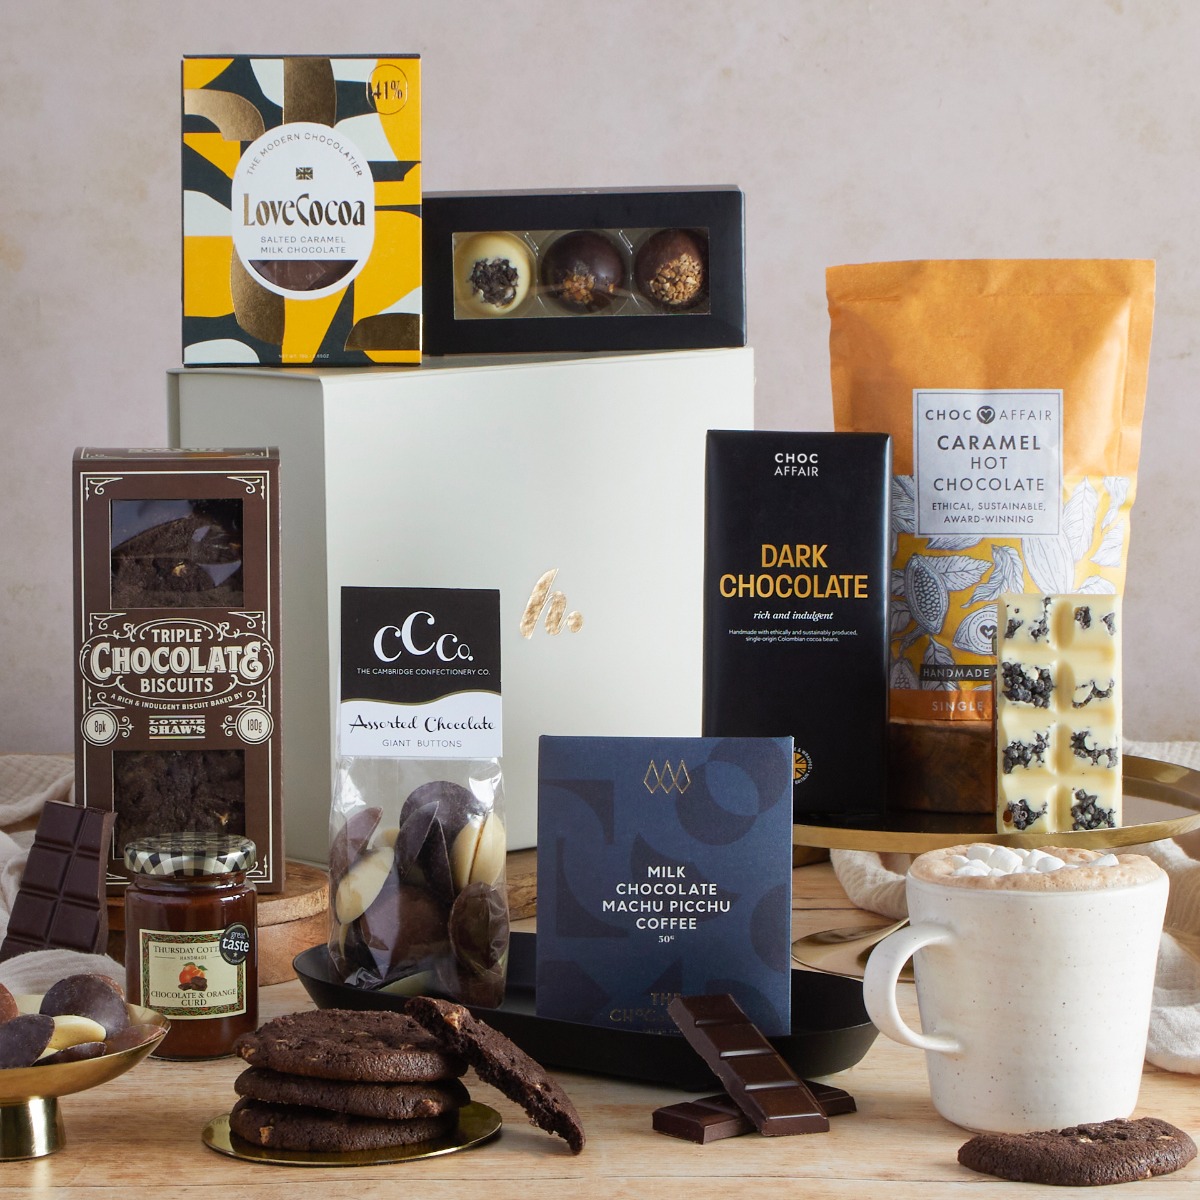 The Chocolate Indulgence Hamper with contents on display as a suggested Easter hamper